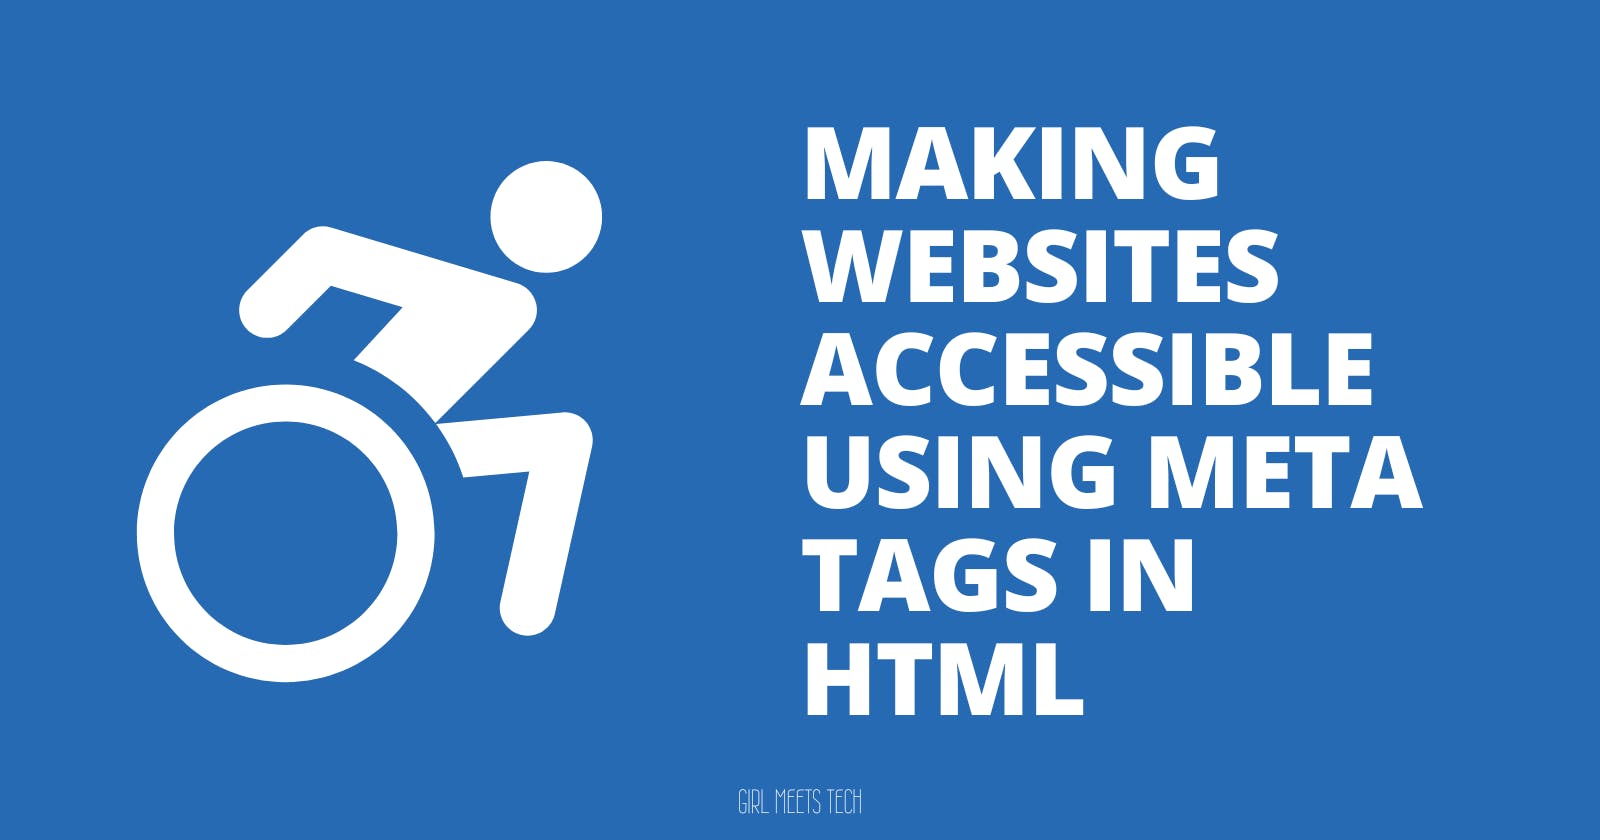 Making Websites Accessible Using Meta Tags in HTML